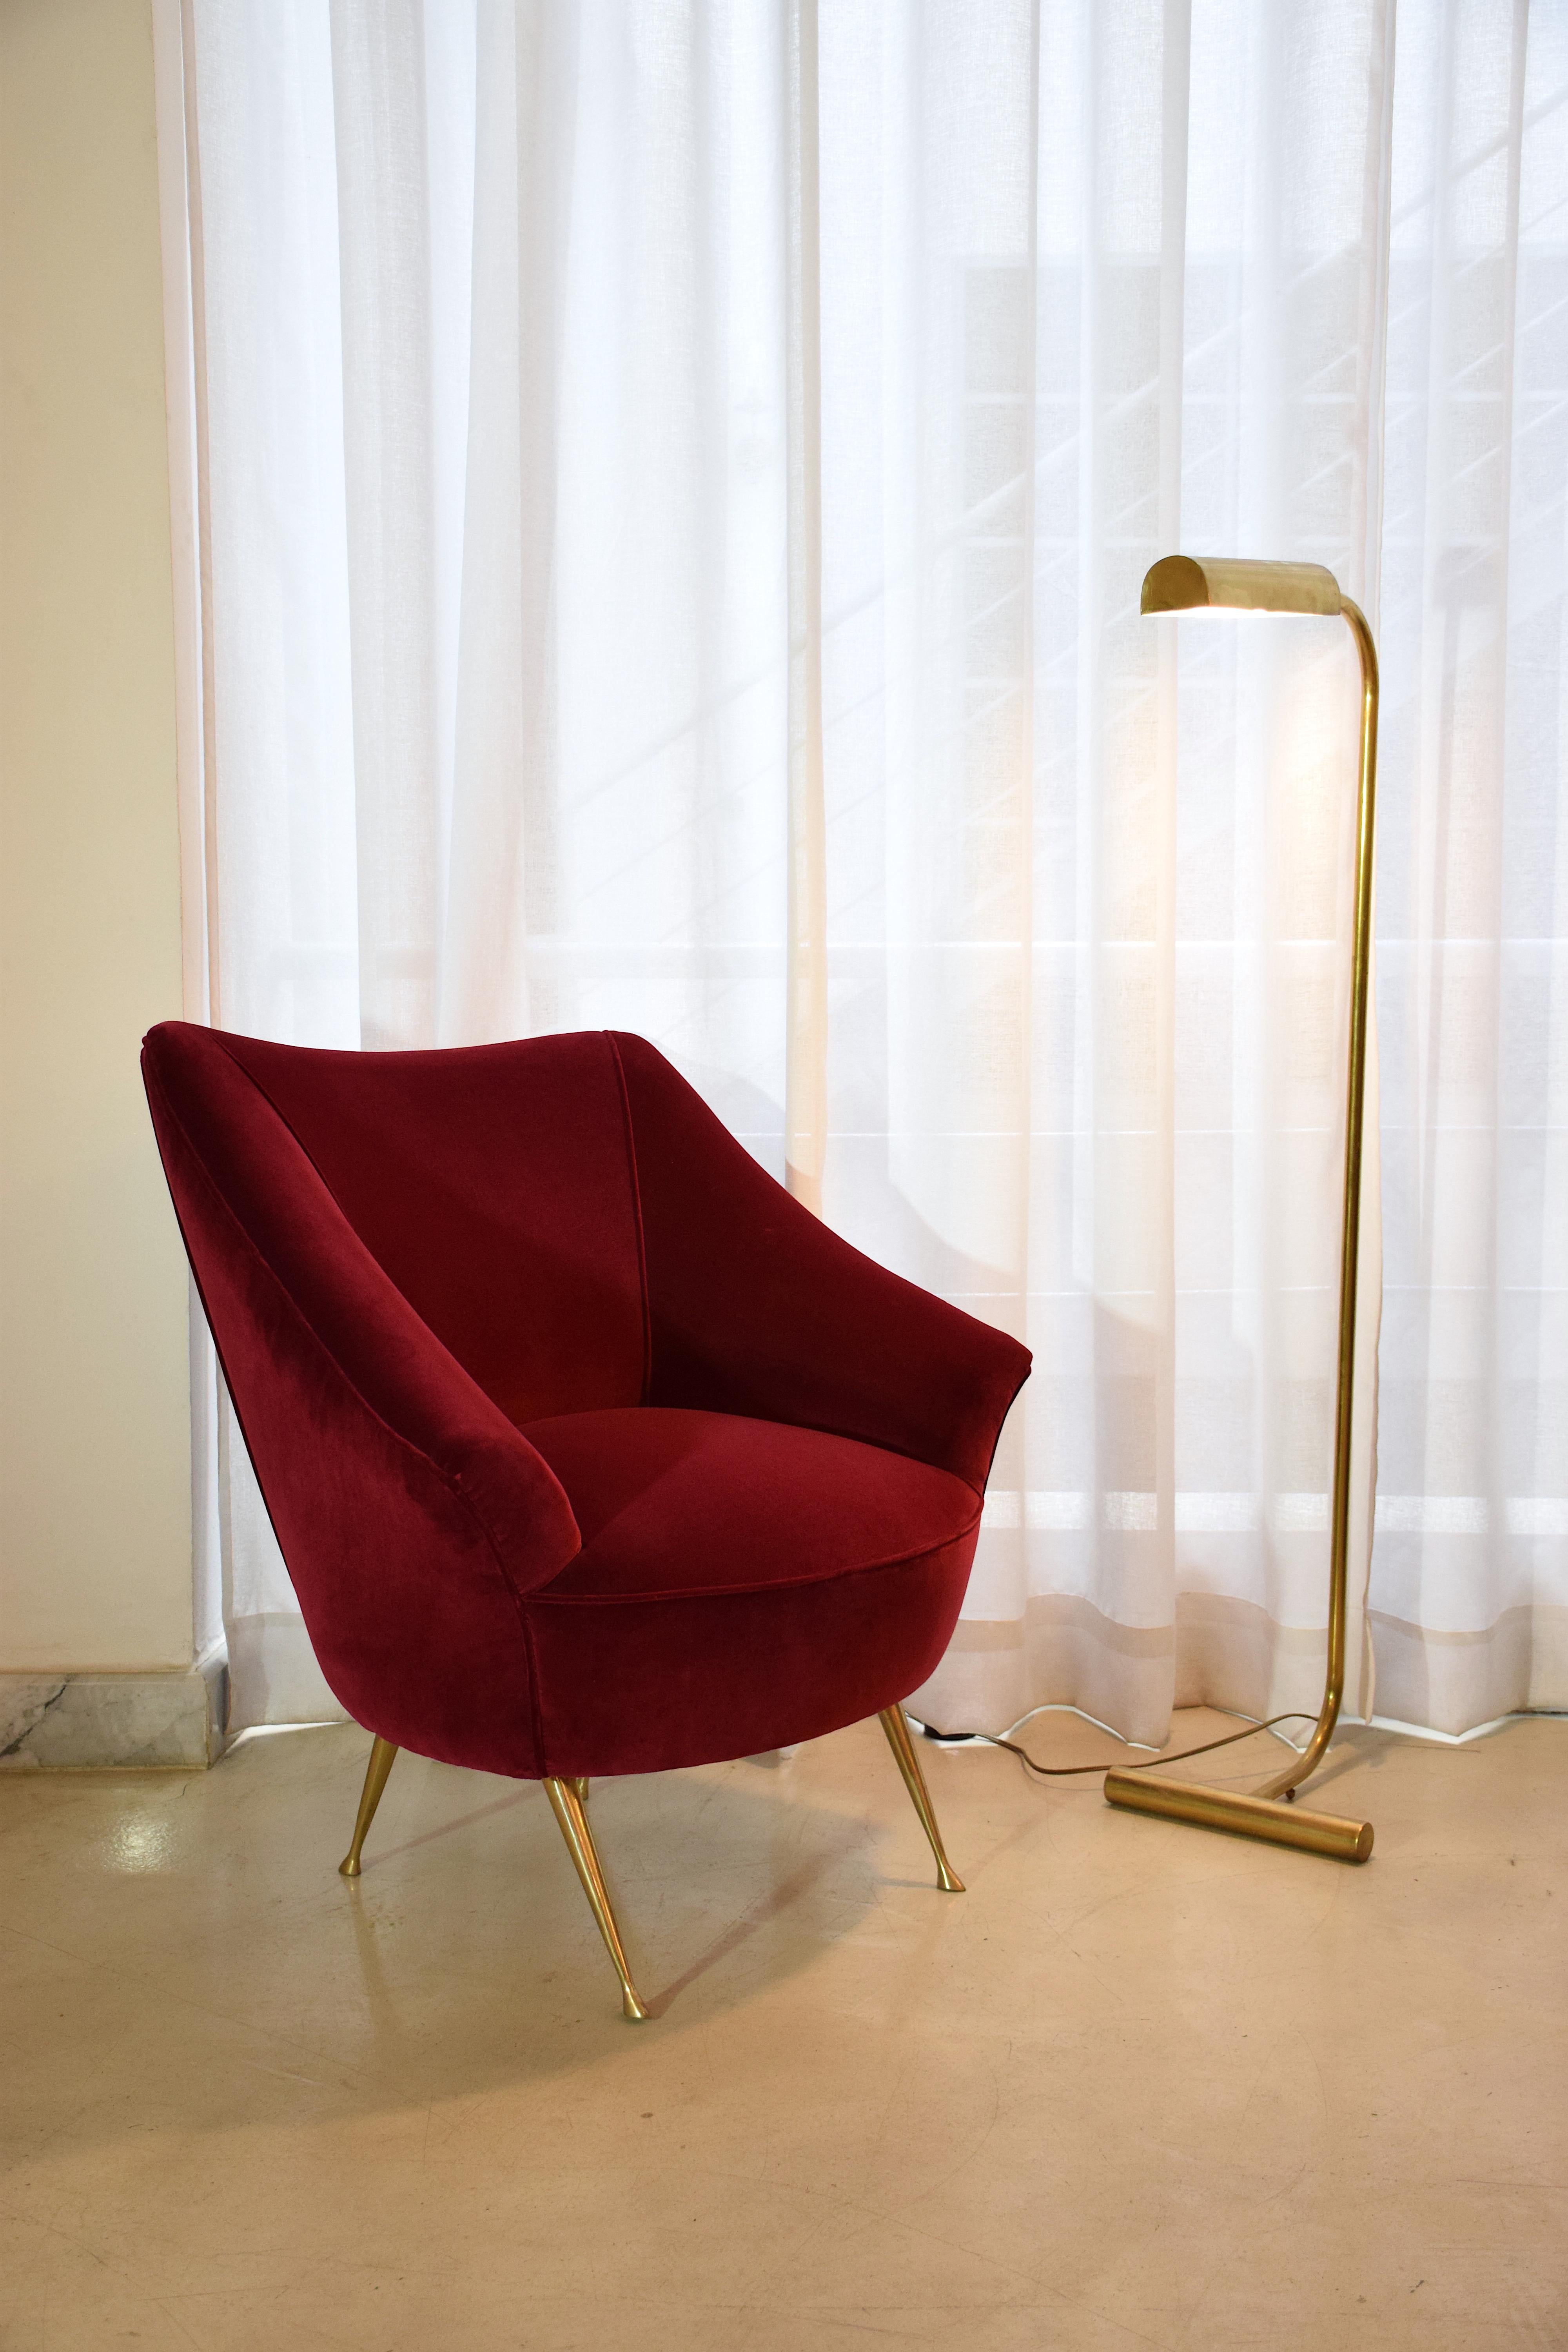 An Italian 20th century vintage brass-legged, curved armchair fully restored with one of the highest quality French upholstery makers, Lelièvre Paris in red velvet. 
The sophisticated brass legs have been carefully polished. 
A two-seater sofa of